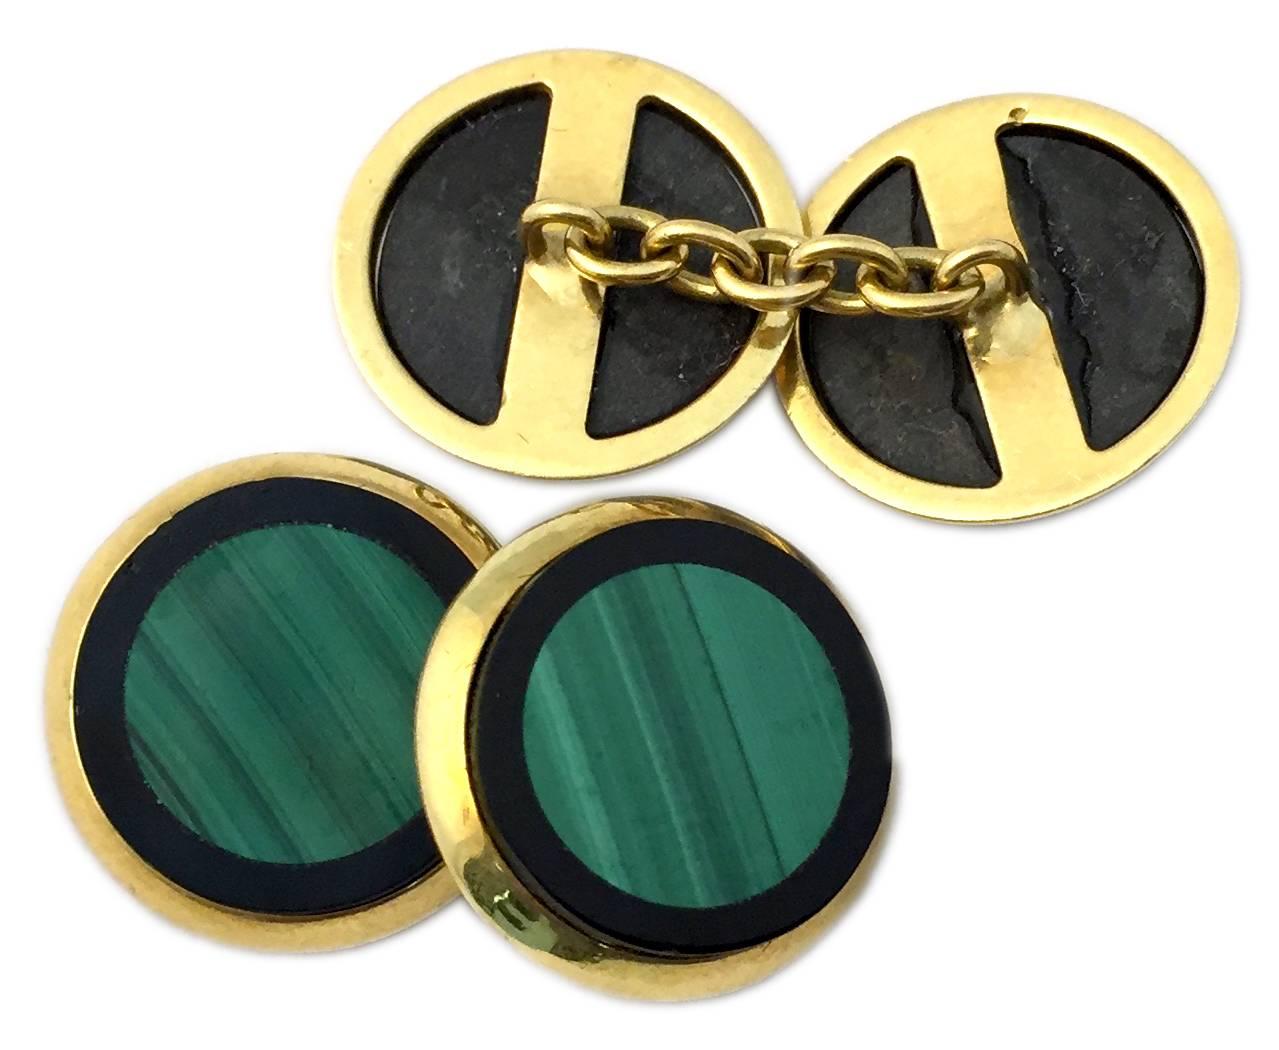 A chic pair of circular shaped cufflinks in malachite and onyx, mounted on 18kt yellow gold. Italy, circa 1980